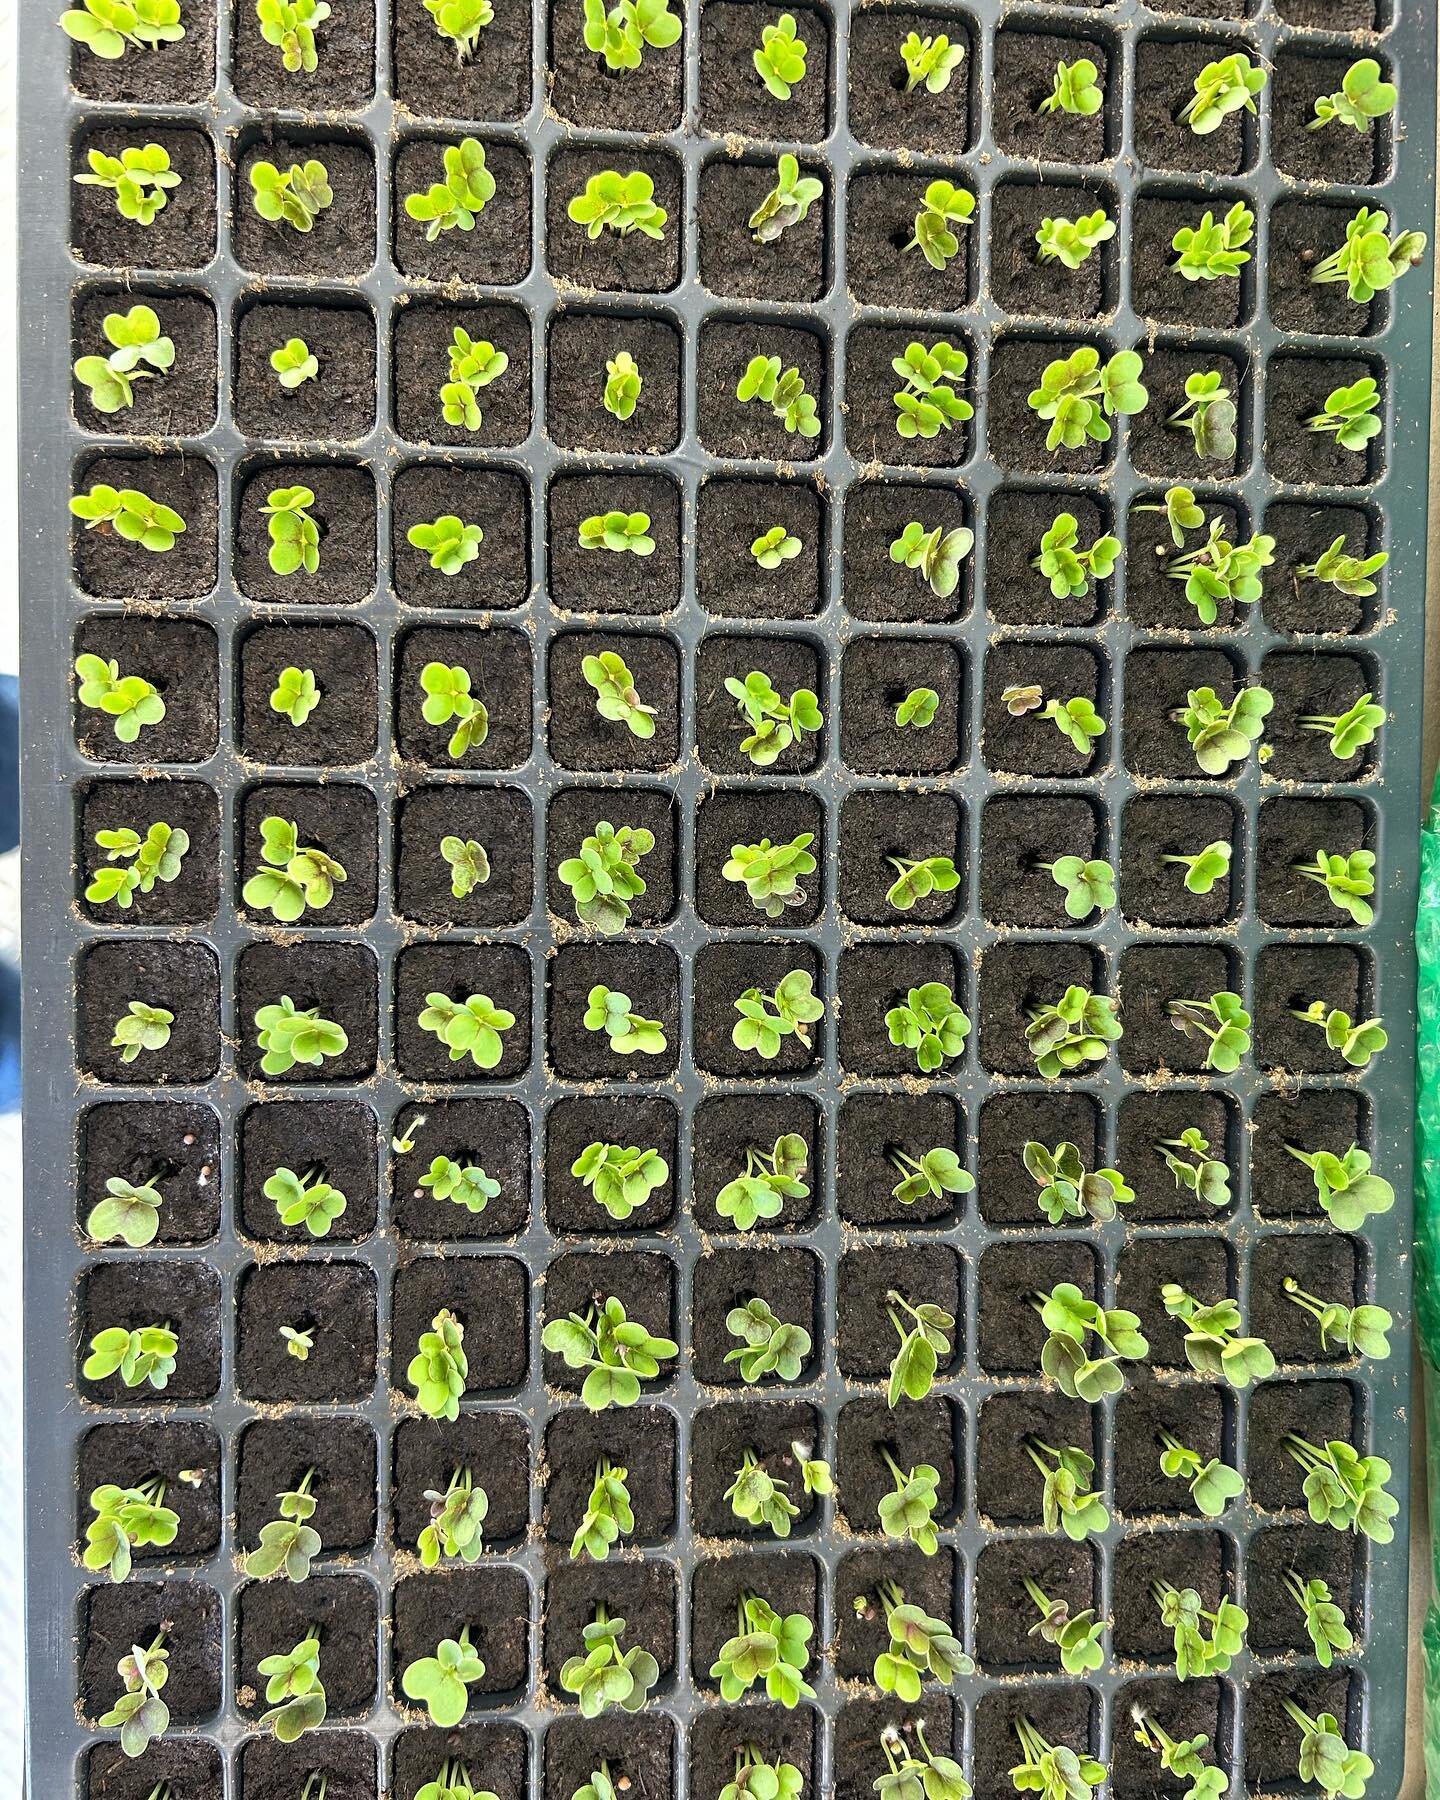 Seedlings are thriving and will soon be in our grow walls!  Our container is finally here and we can&rsquo;t wait to show it off! #citygreens #hydroponics #growlocal #urbanfarming #farmboxfoods